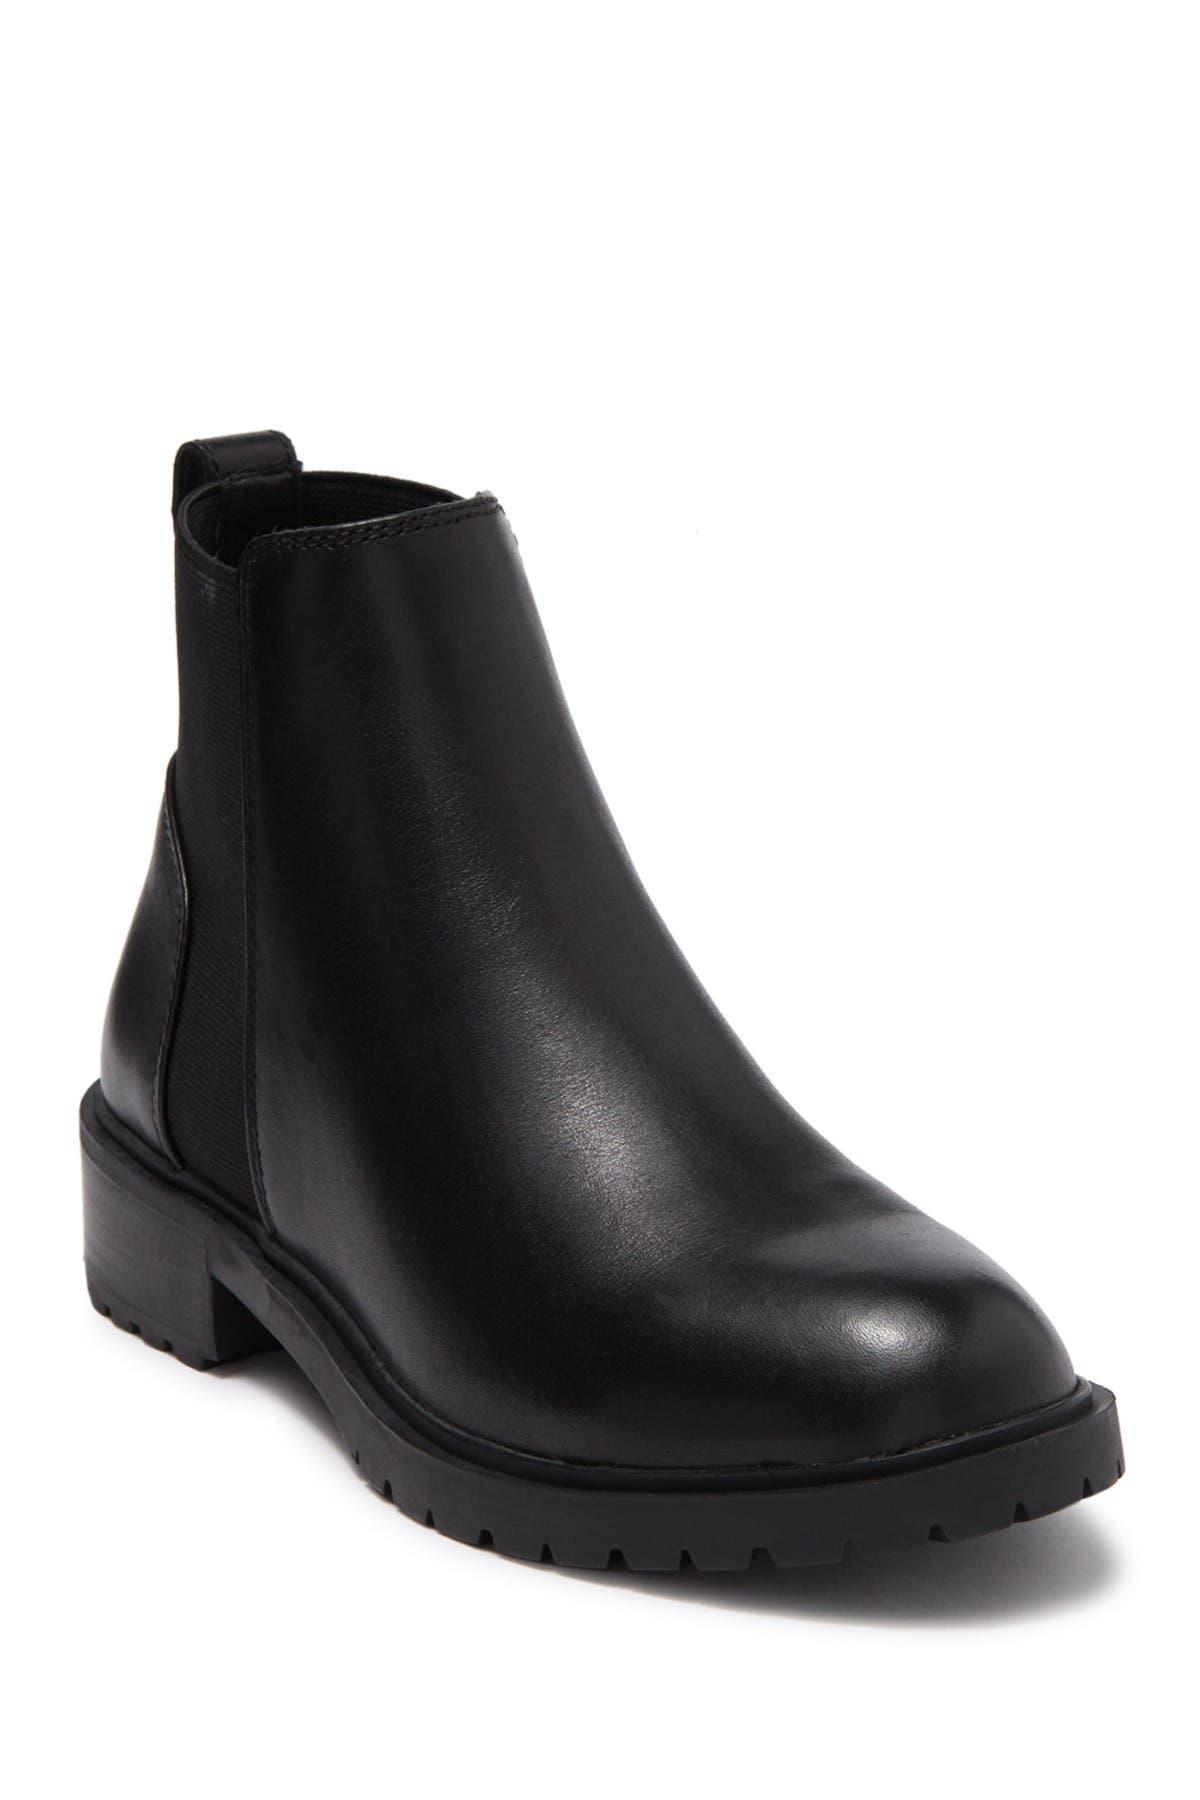 Steve Madden Buzzing Ankle Boot In Black Leather At Nordstrom Rack | Lyst